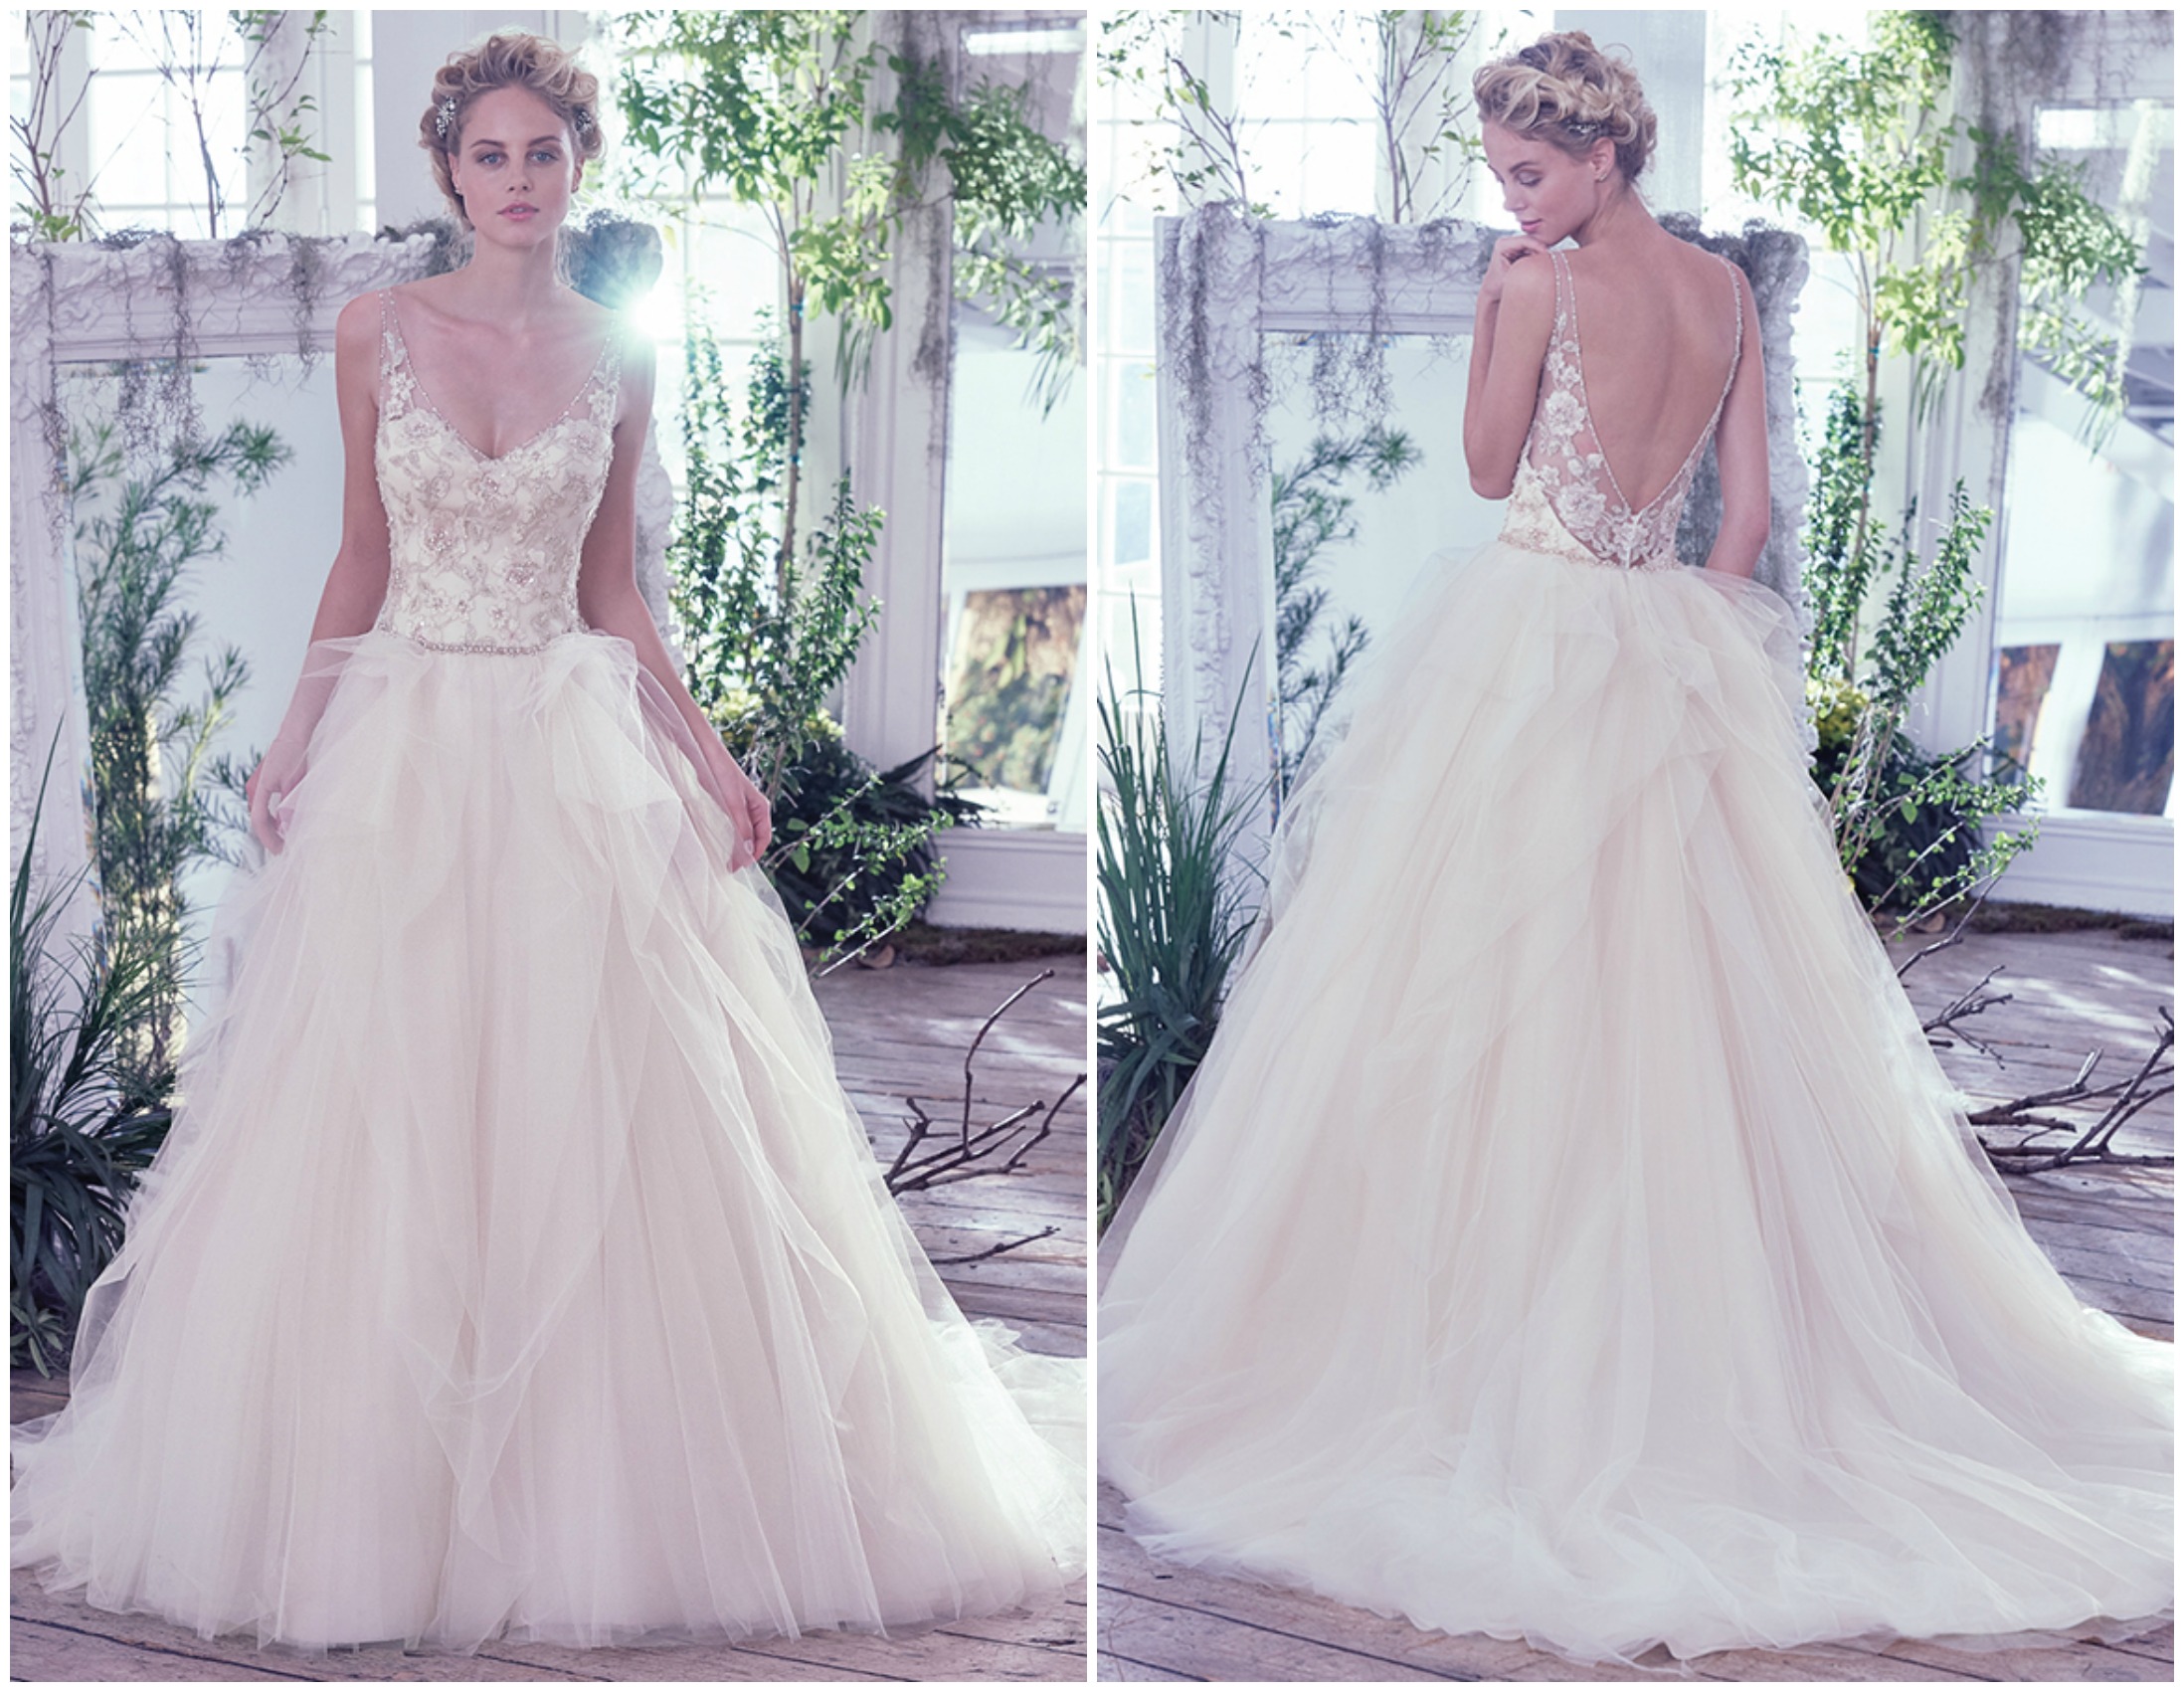 This whimsical ball gown features embroidered lace, eye-catching Swarovski crystals, and beading intricately woven onto the fitted bodice with illusion sweetheart neckline and straps. Layers of tulle cascade weightlessly from the natural waistline creating an ultra-dreamy look. A dramatic illusion V-back is finished with crystal buttons over zipper closure. 

<a href="https://www.maggiesottero.com/maggie-sottero/carlotta/9727" target="_blank">Maggie Sottero</a>